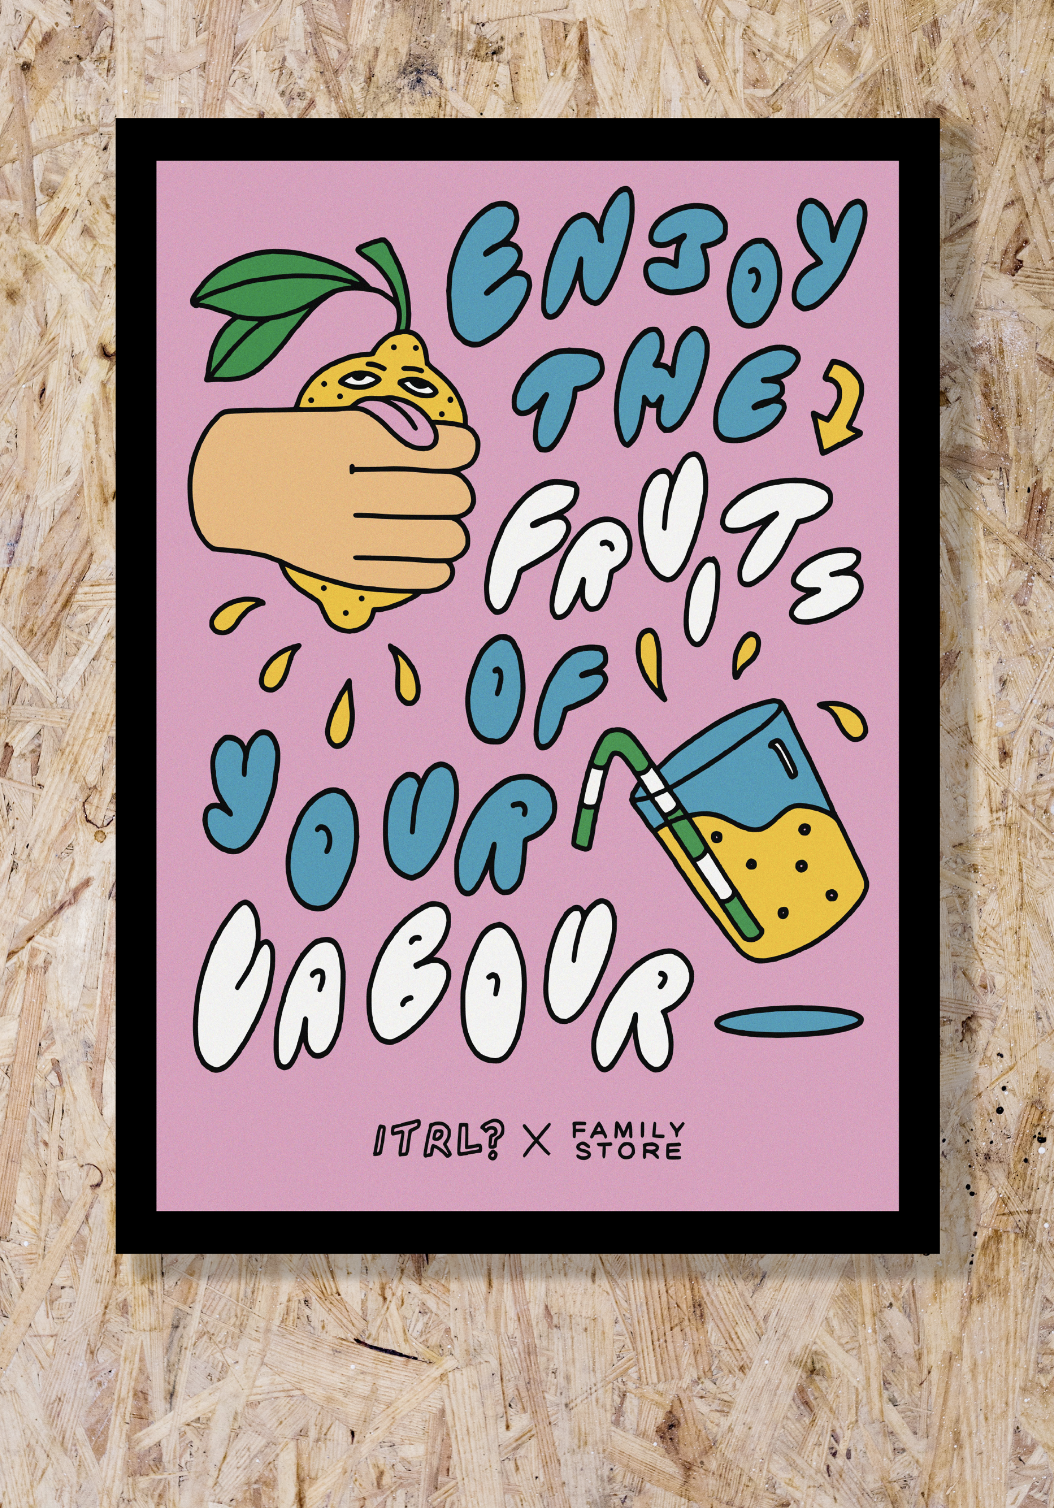 FRUITS OF YOUR LABOUR ART PRINT by ITRL x FS